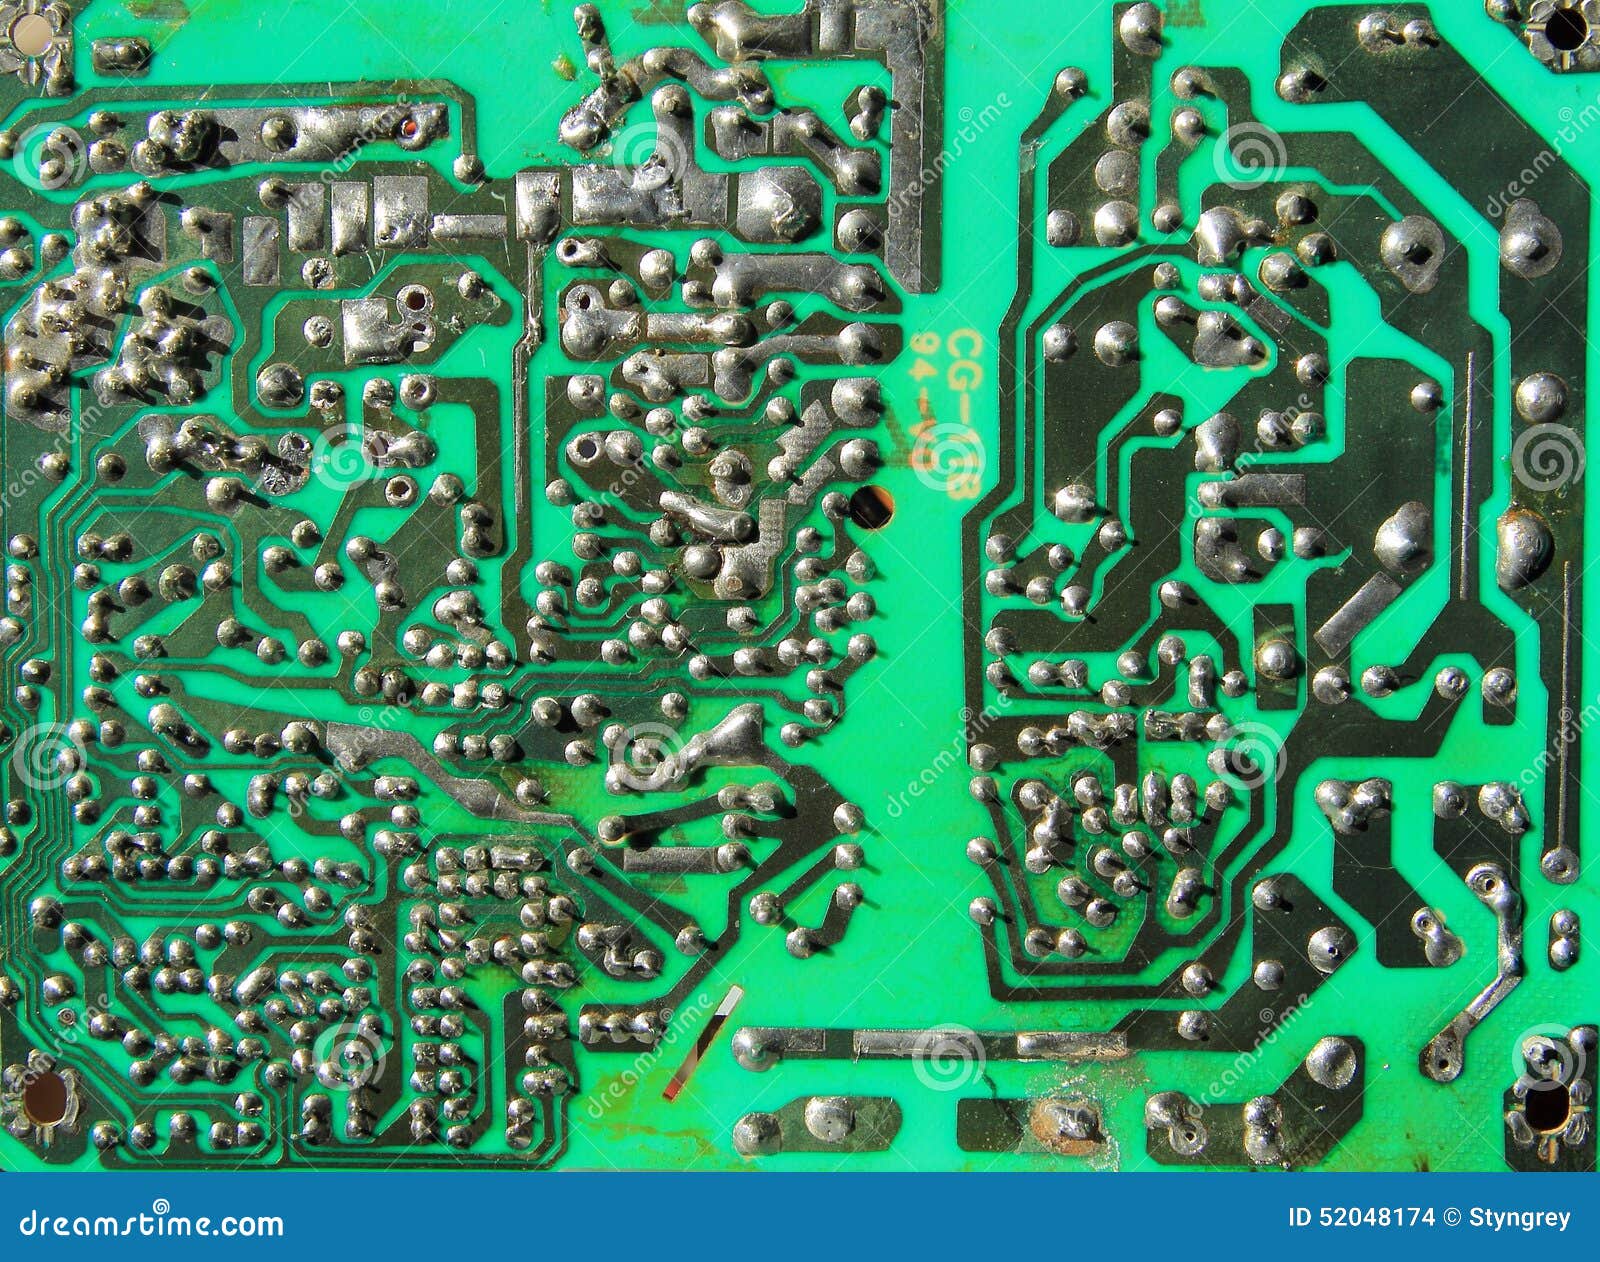 Old printed circuit boards, PCB